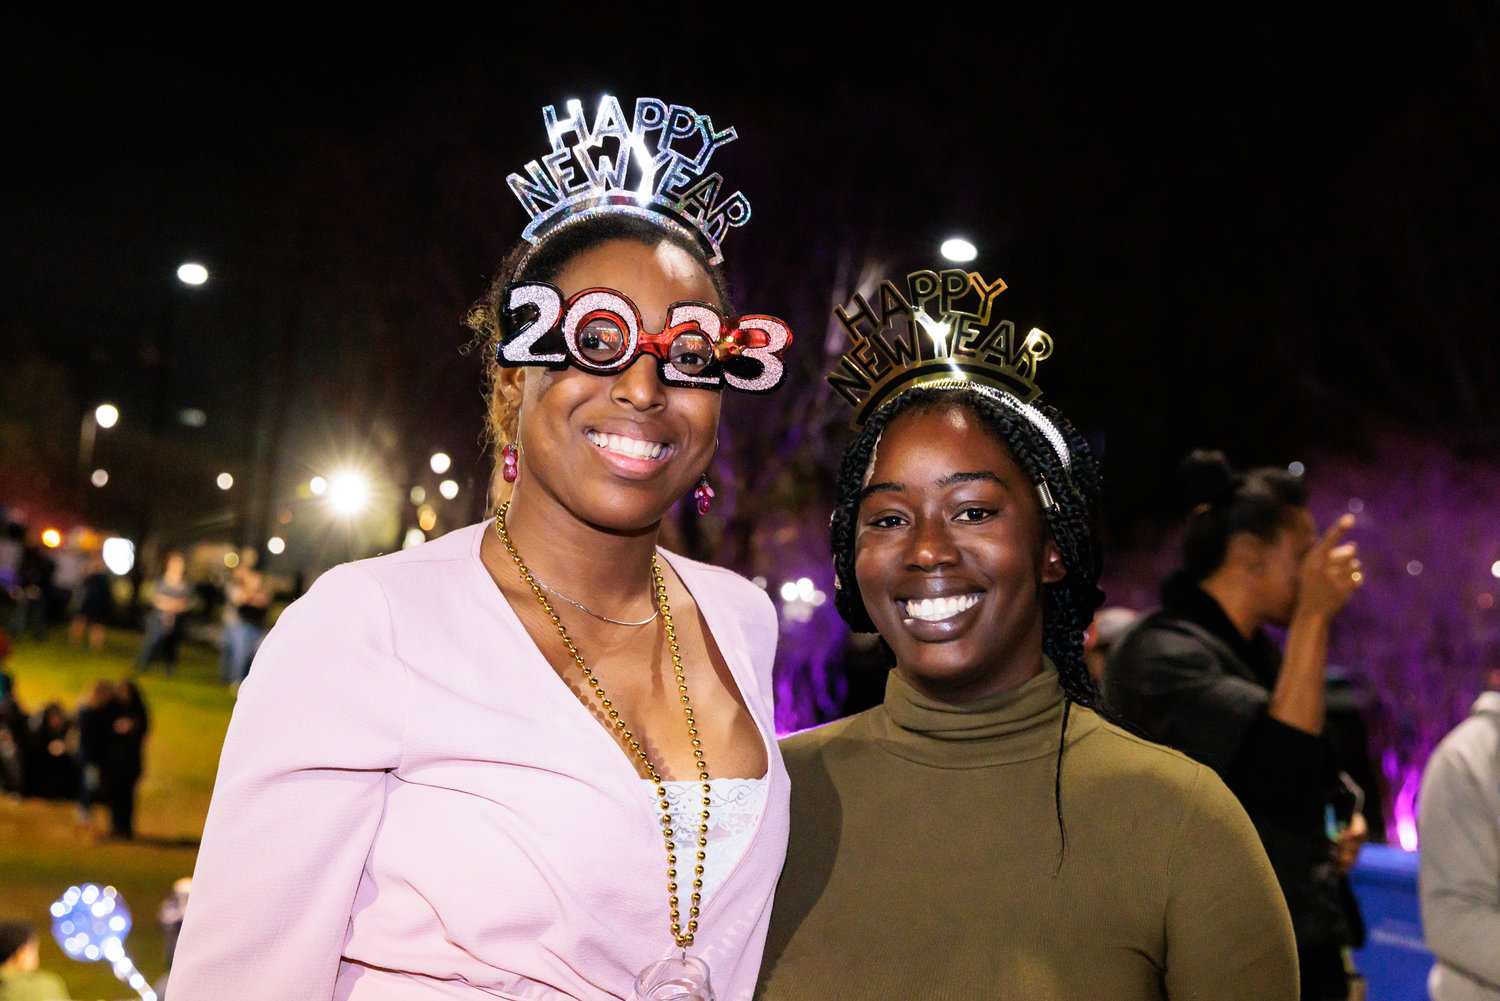 Yasmin Boone and Naquiah Boone wear festive head gear during “Night Circus: A District New Year’s Eve Spectacular” in Festival Park.